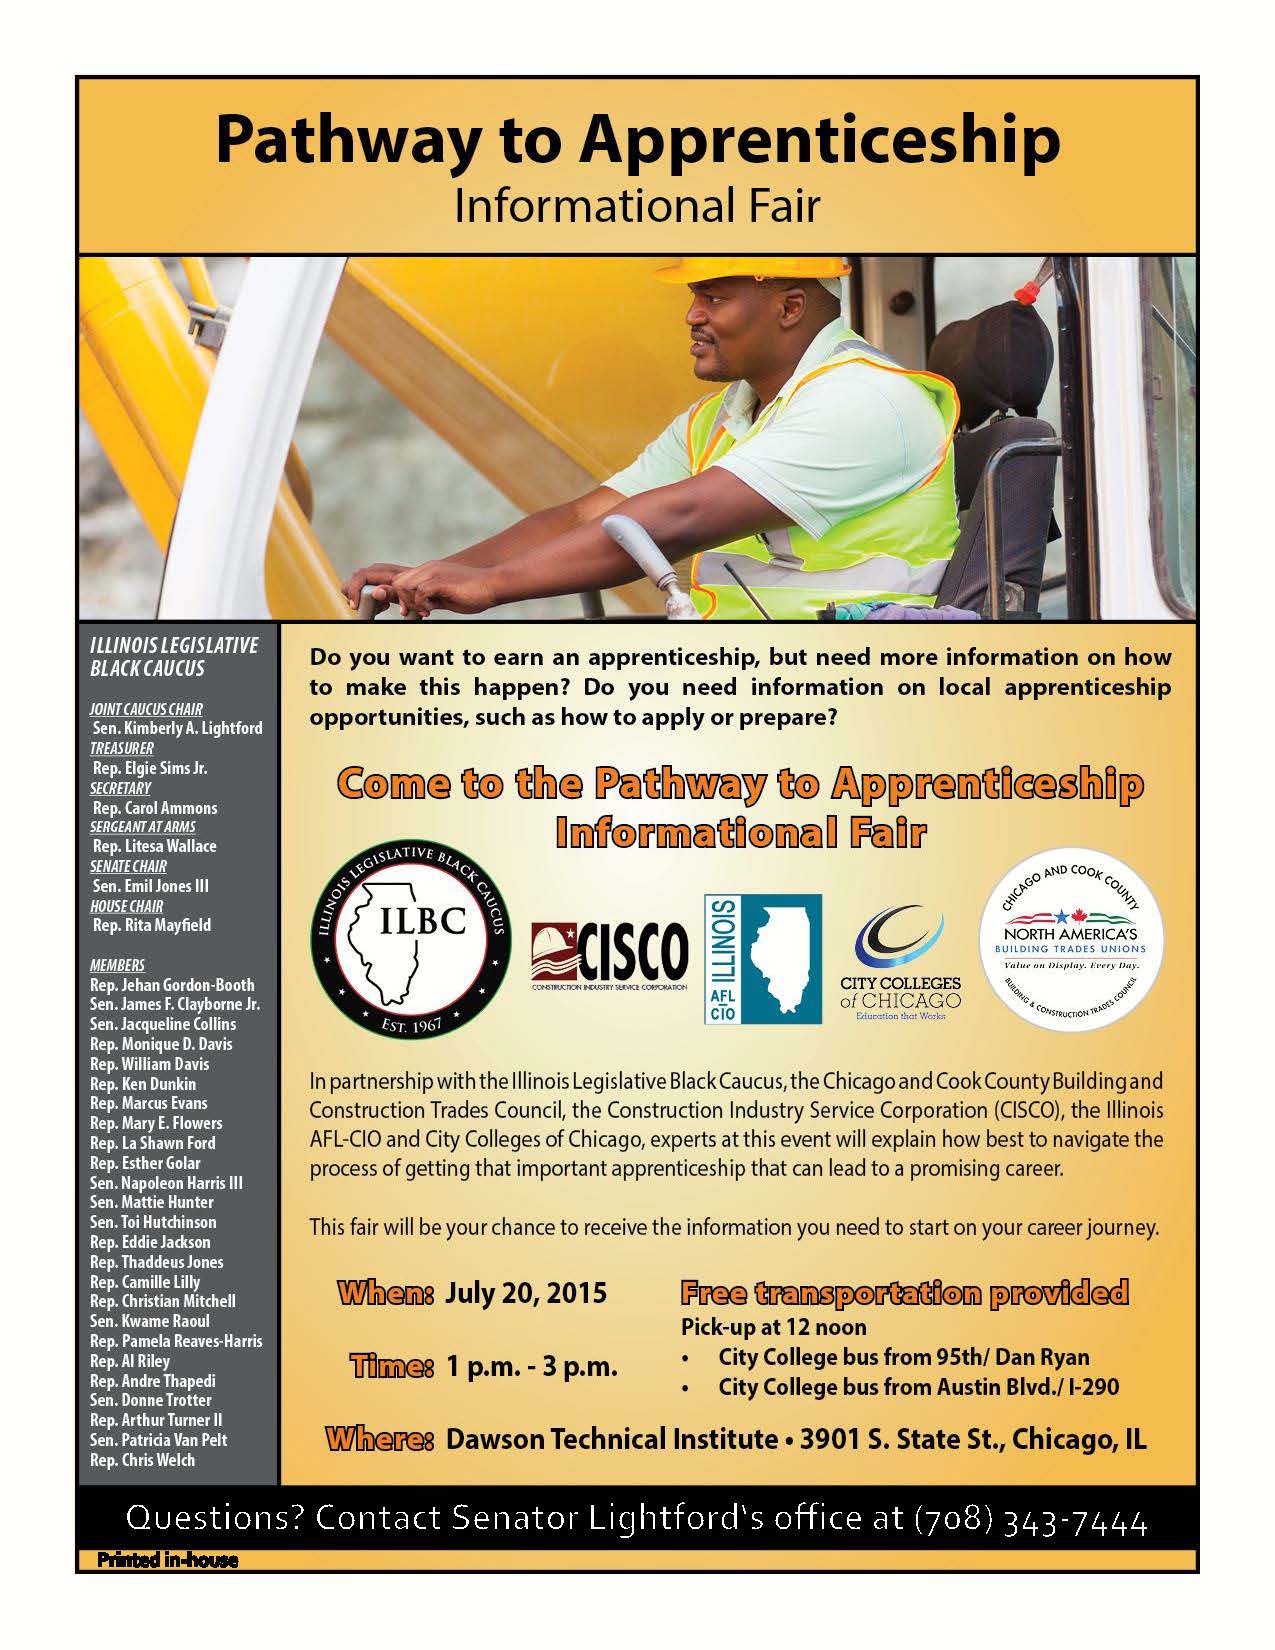 Pathway to Apprenticeship Flyer posted version